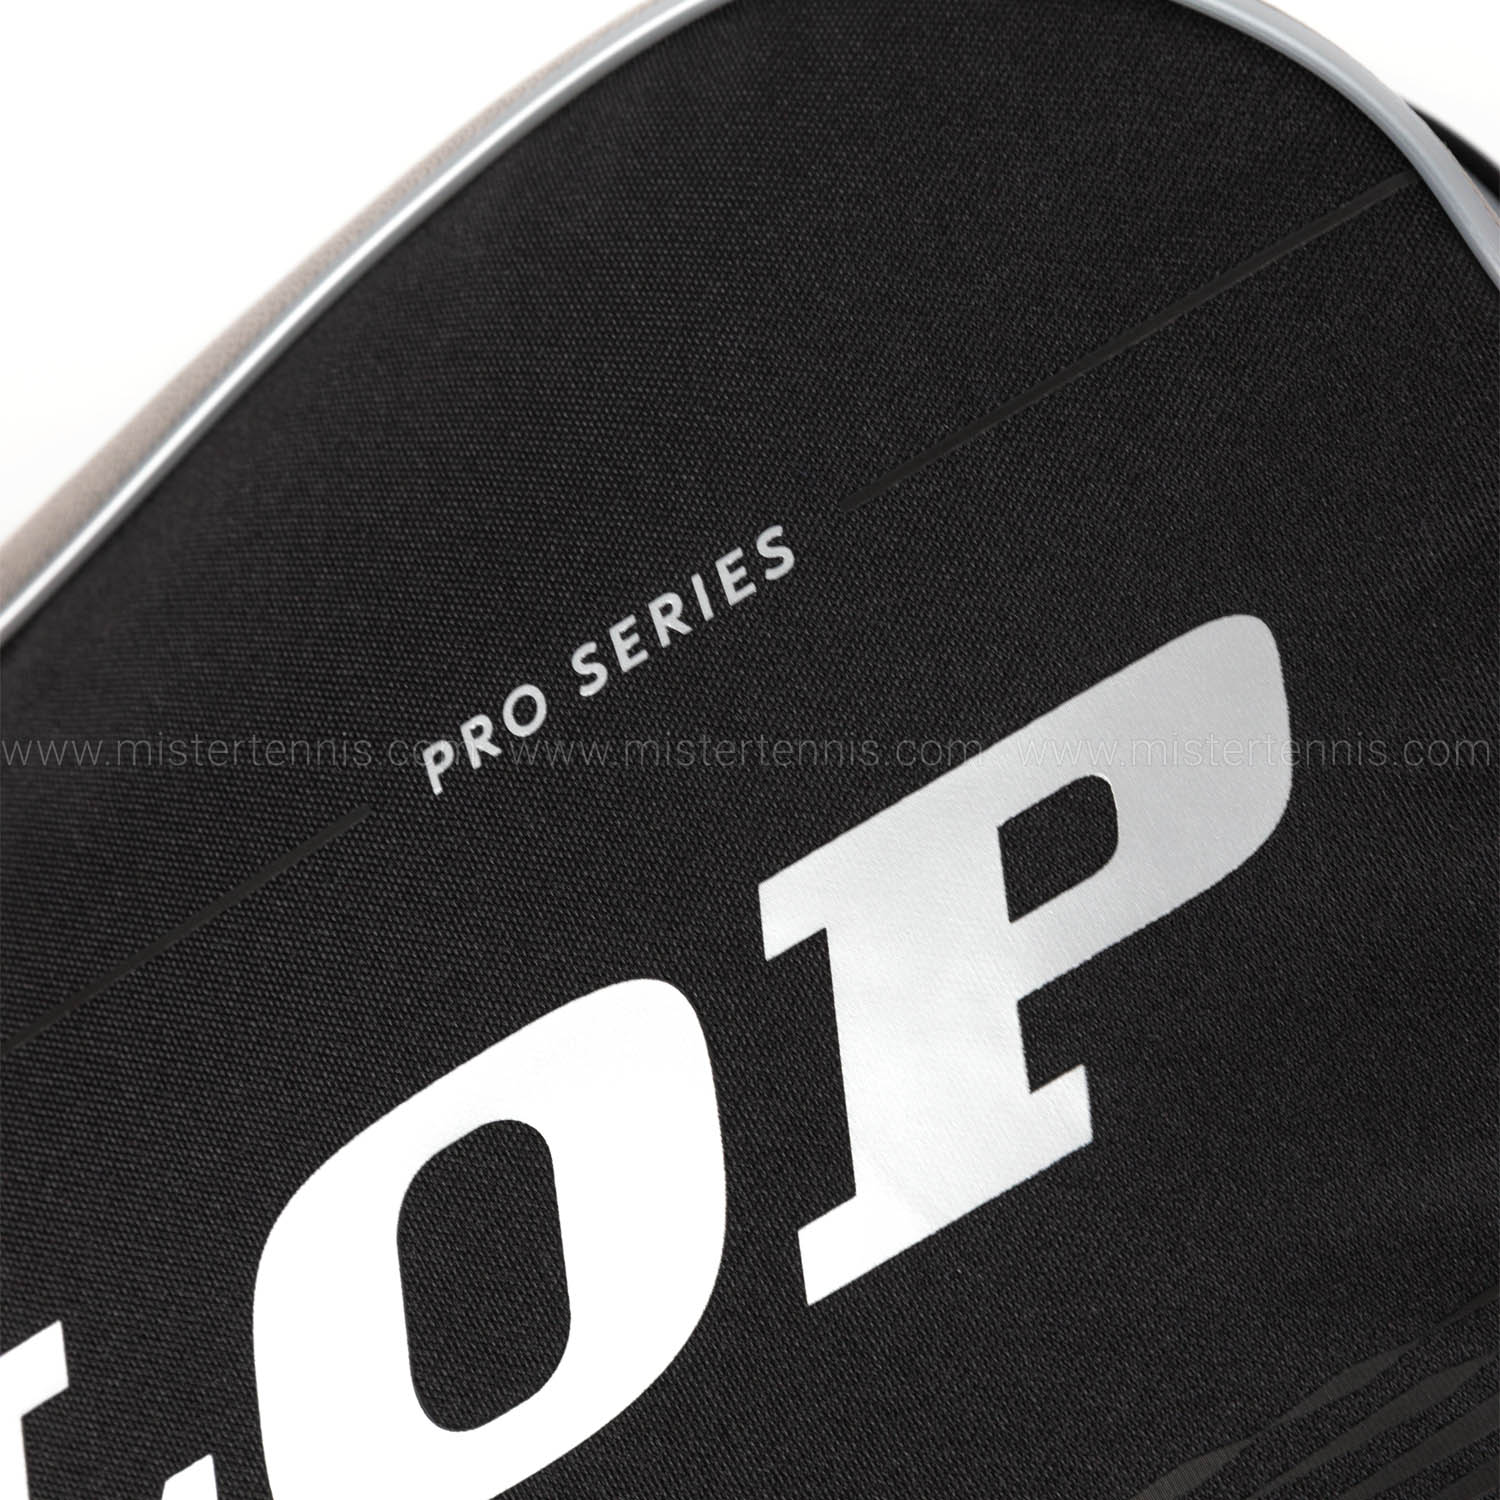 Dunlop Pro Series Thermo Bag - Black/Silver